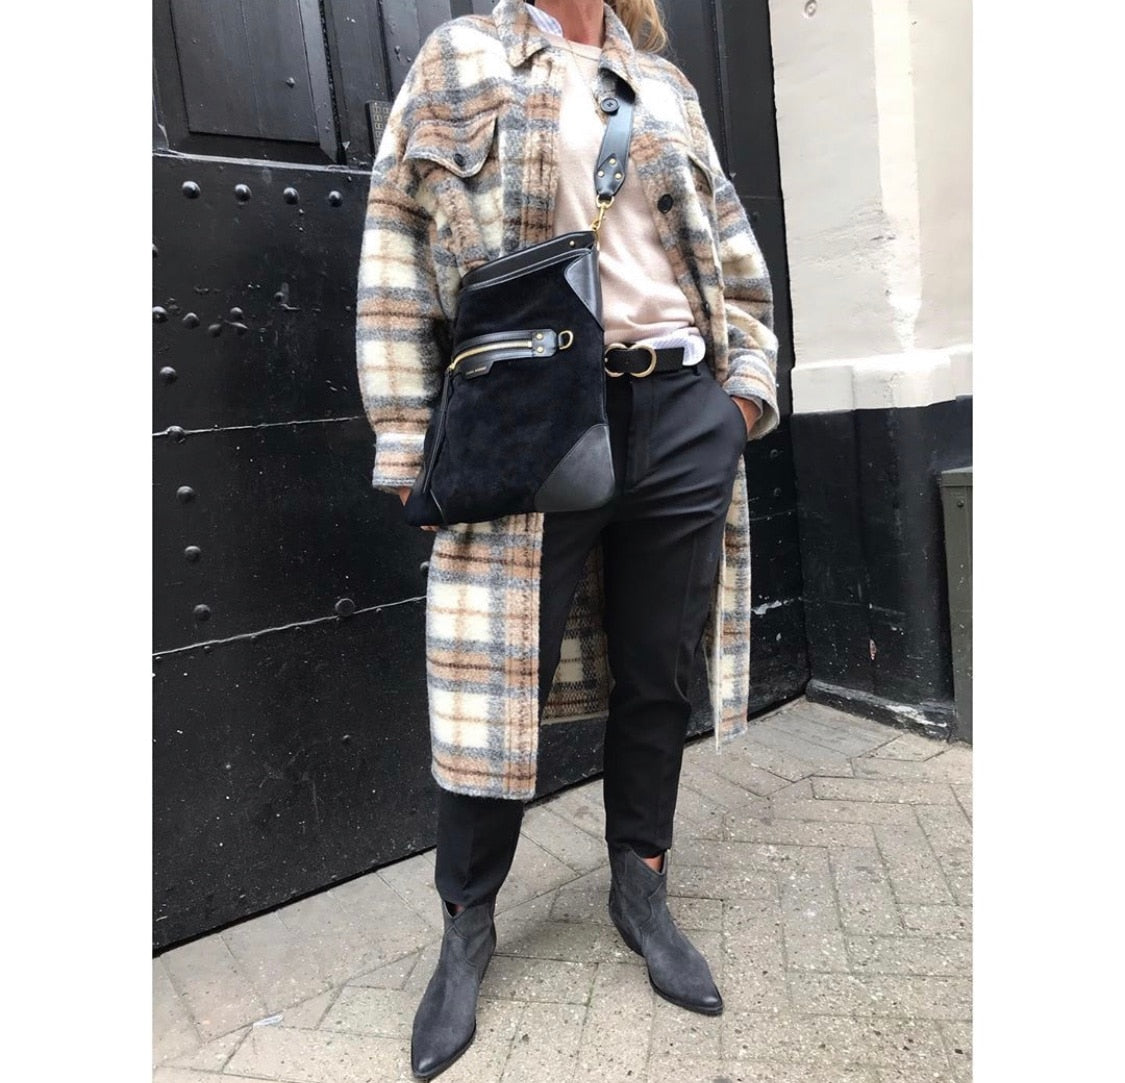 xakxx New Autumn Winter Women Thick Vintage Plaid Long Wool Coat Casual Oversize Shirt Jacket Loose Warm Outwear Overcoats Female